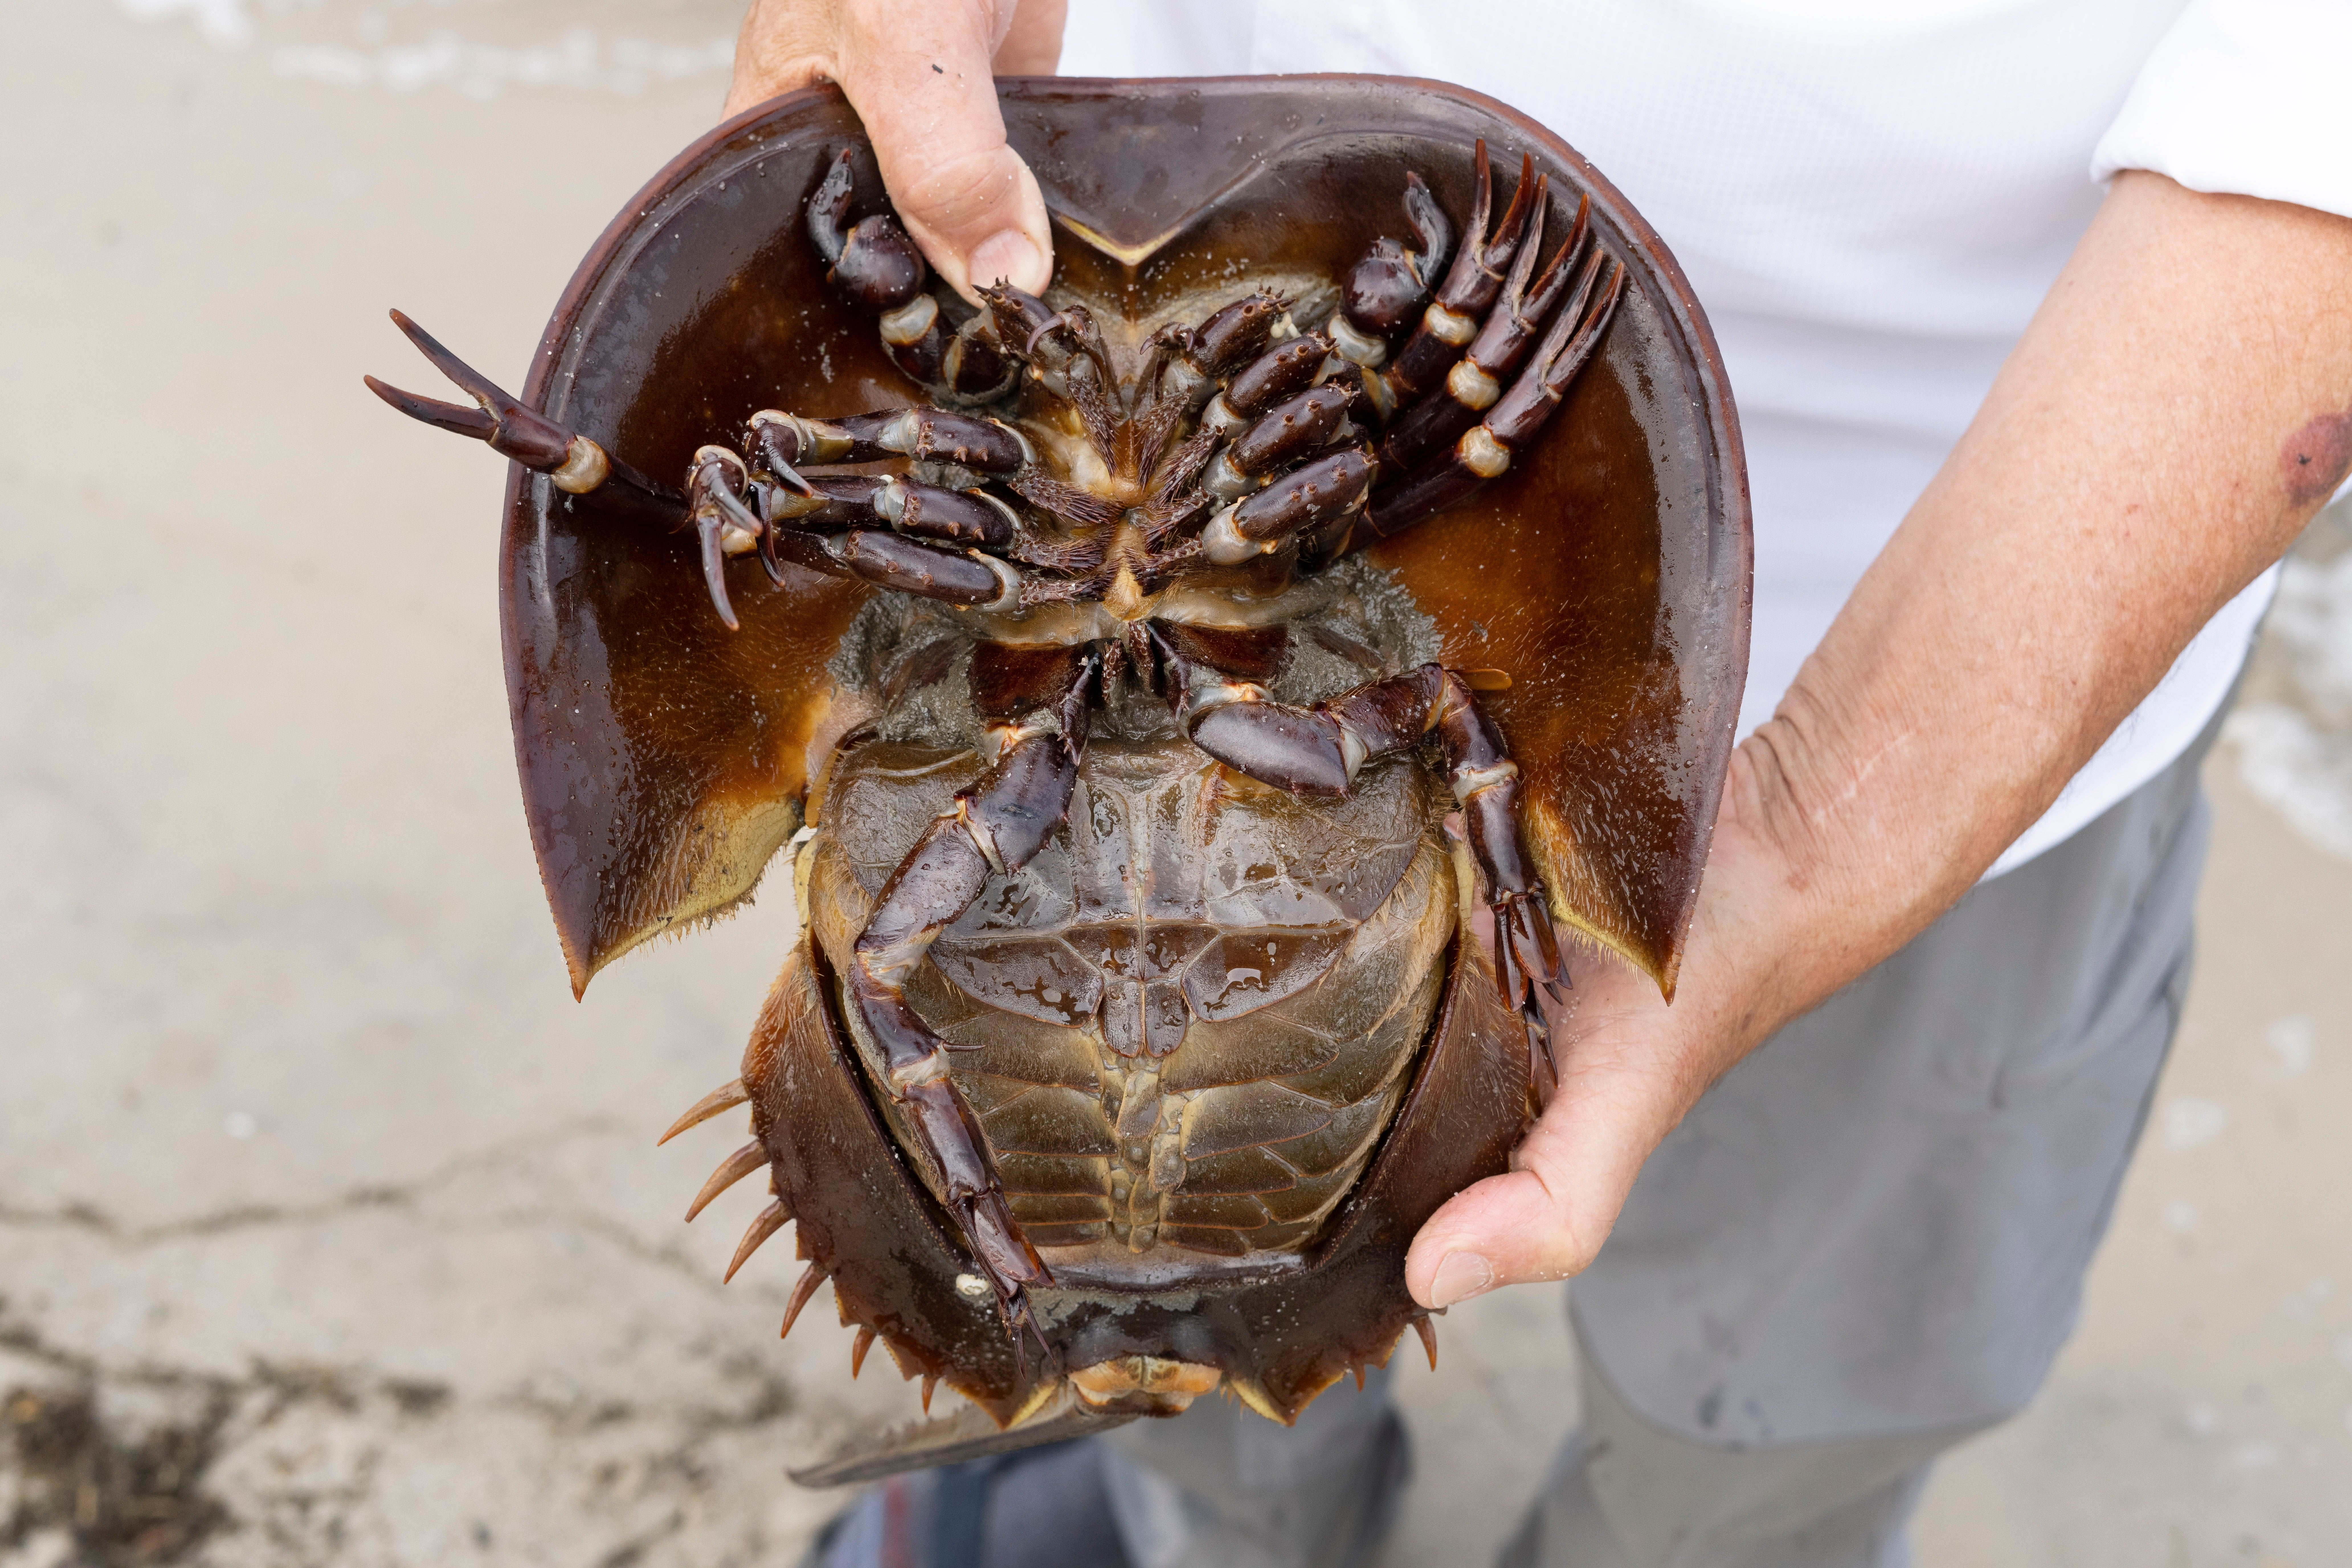 An ecologist displays the underside of a horseshoe crab at Pickering Beach in Dover, Delaware